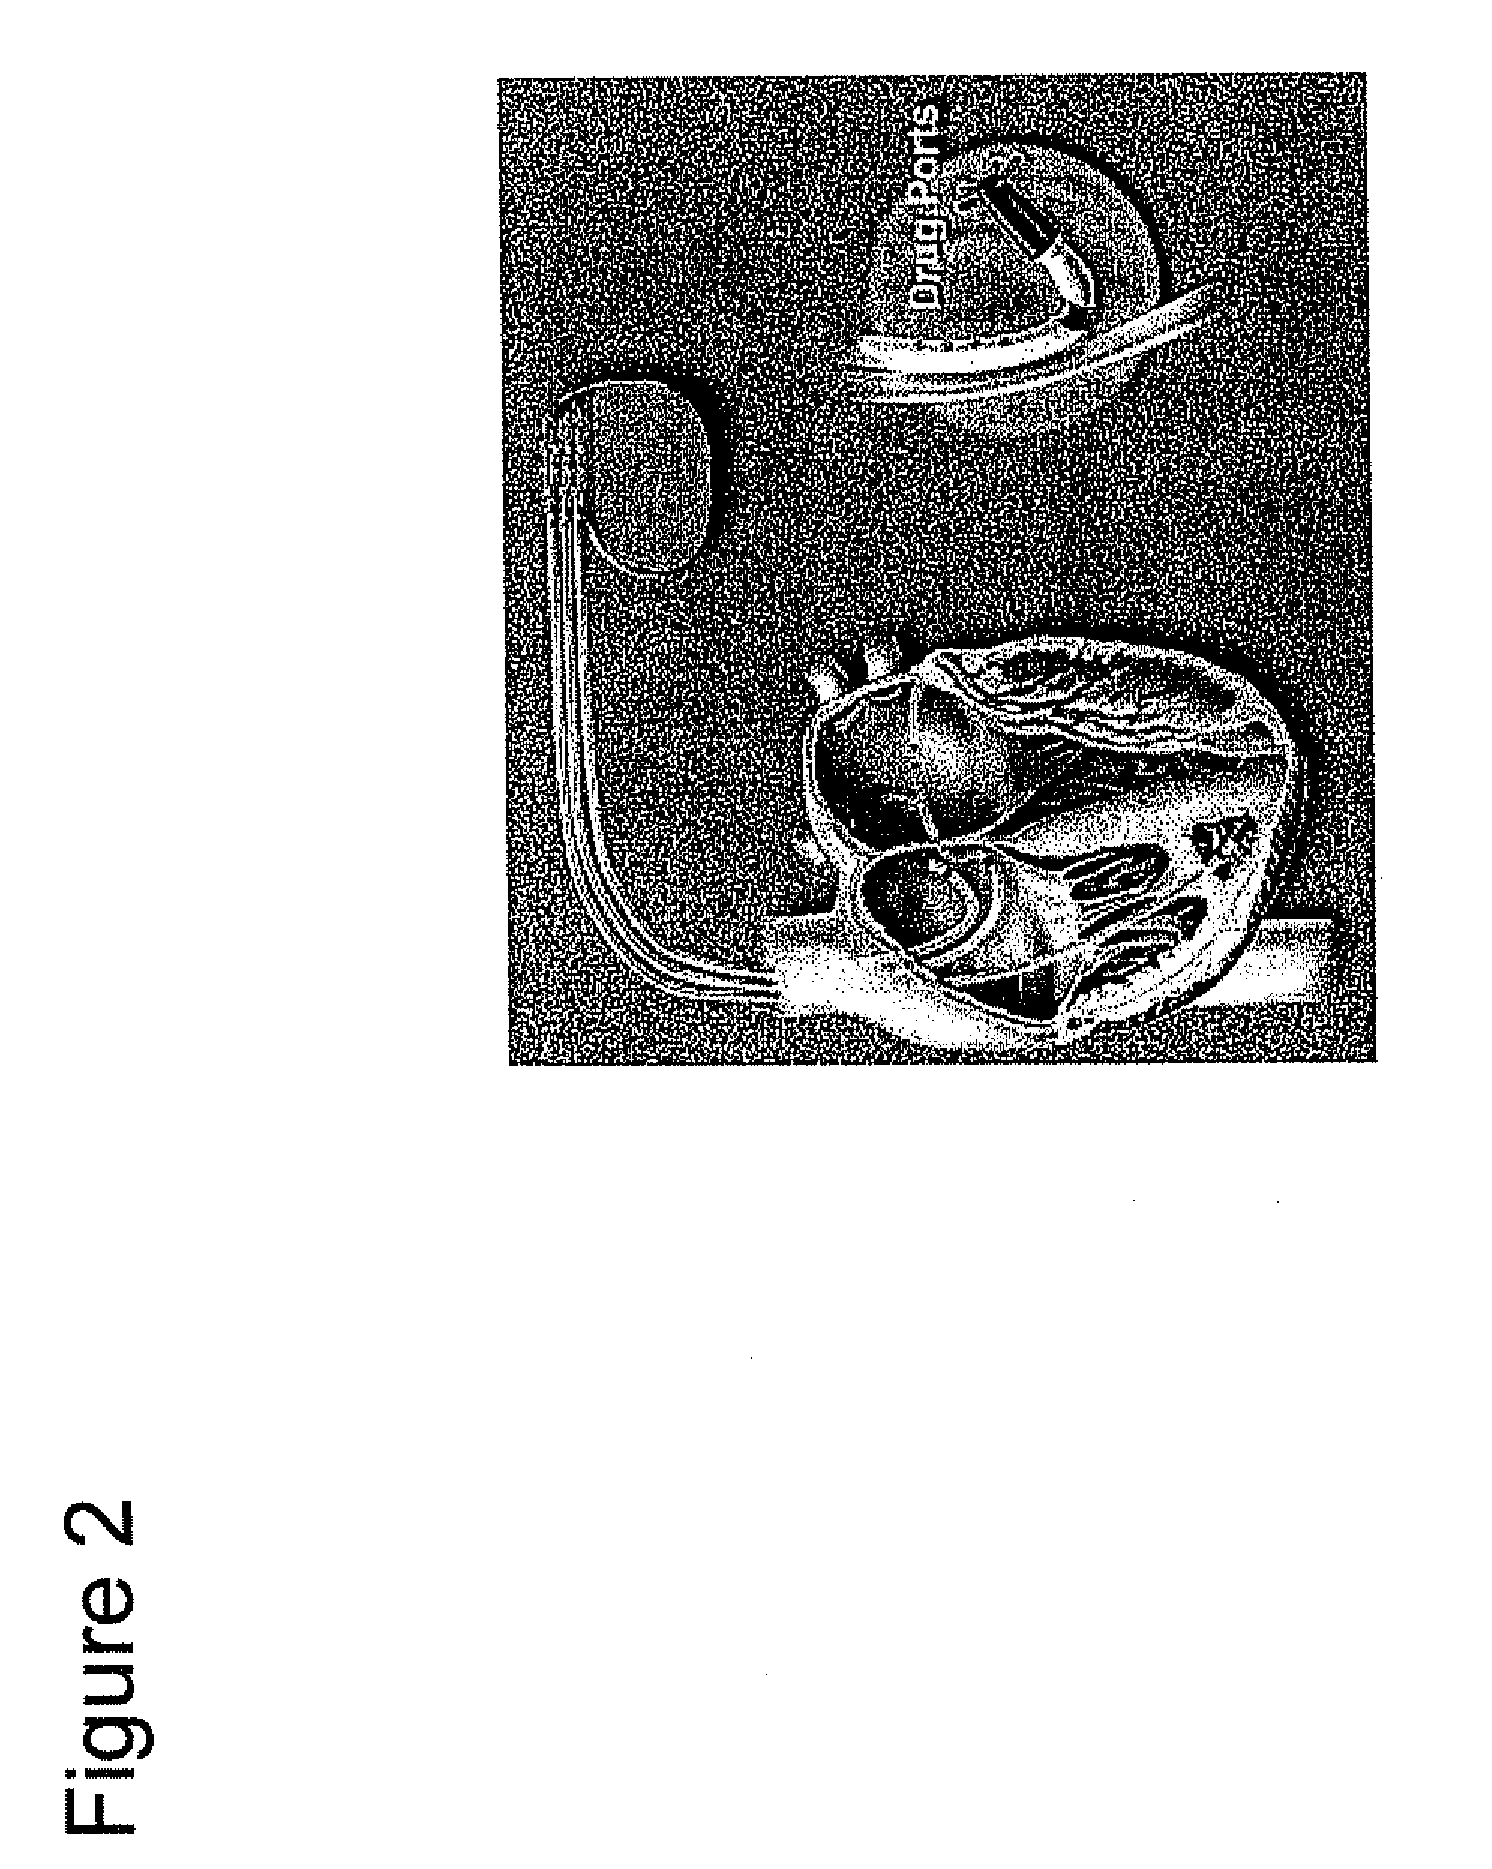 Method and apparatus for detection and treatment of autonomic system imbalance